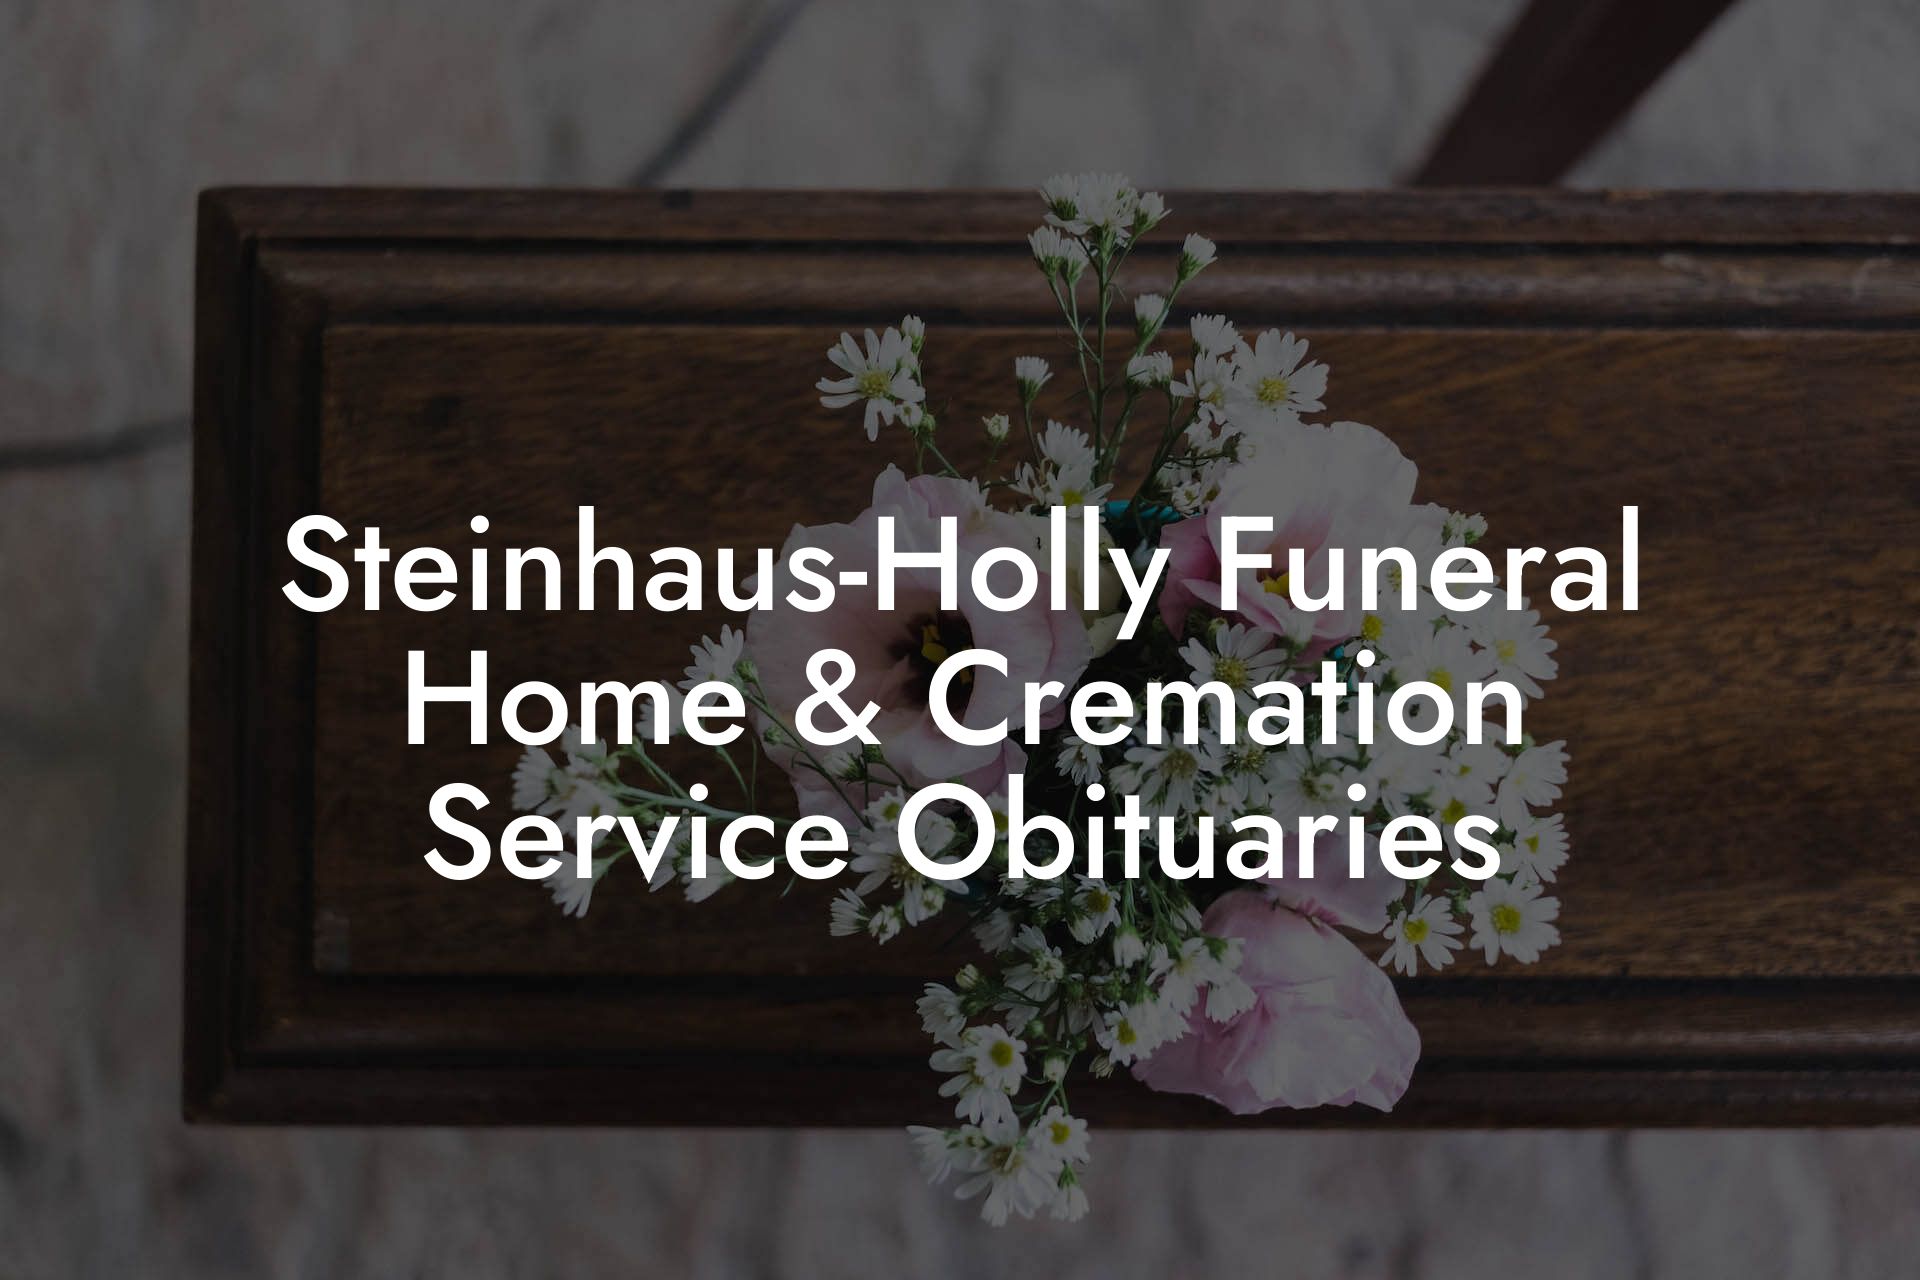 Steinhaus-Holly Funeral Home & Cremation Service Obituaries